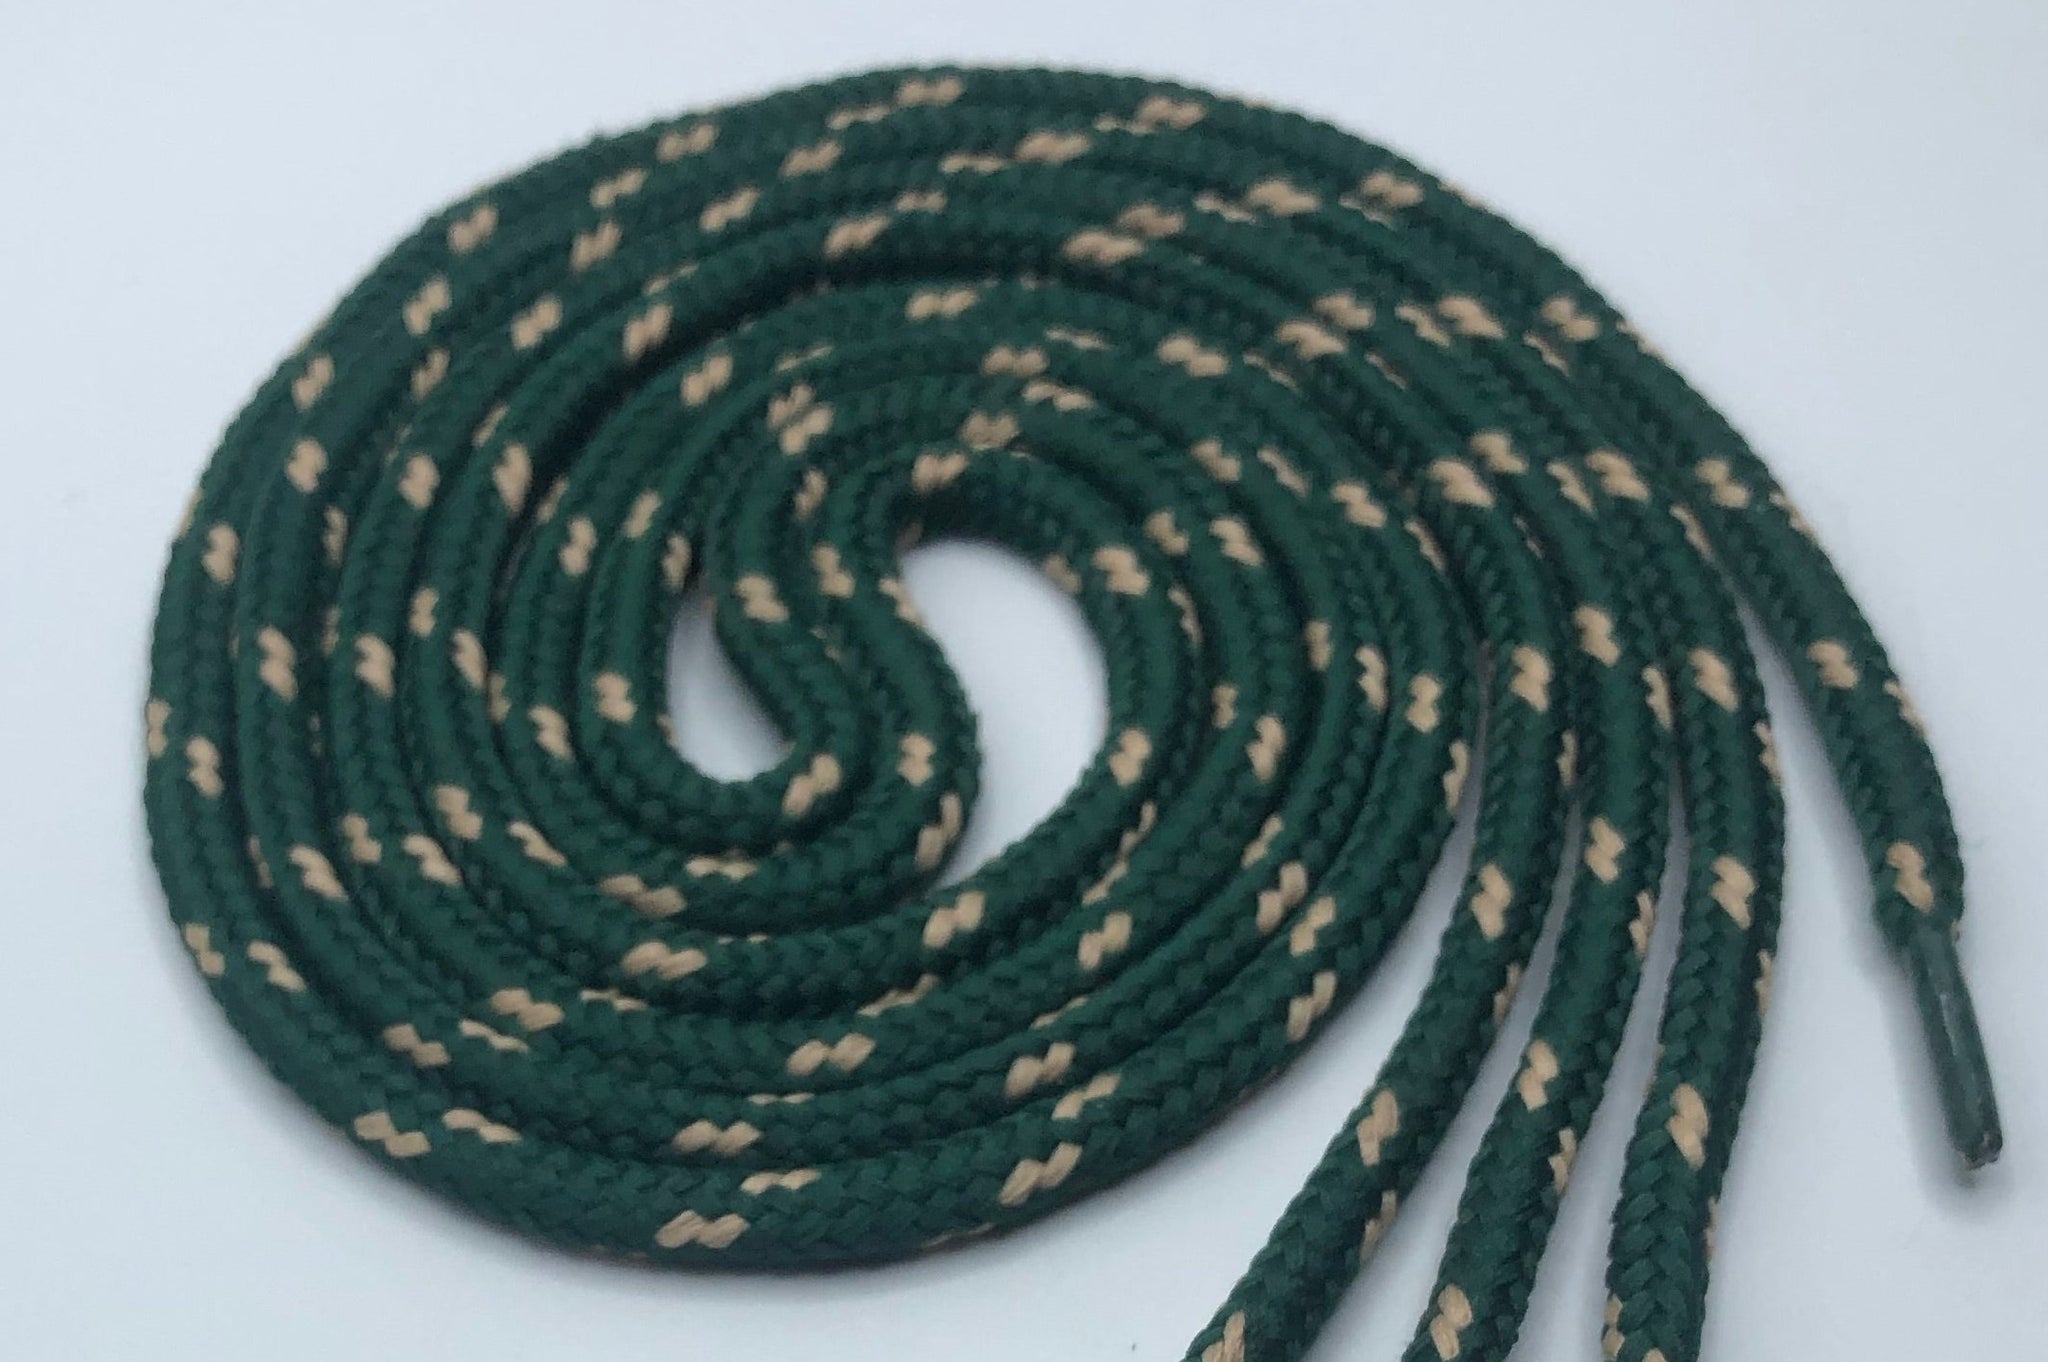 Round Classic Shoelaces - Forest Green with Tan Accents